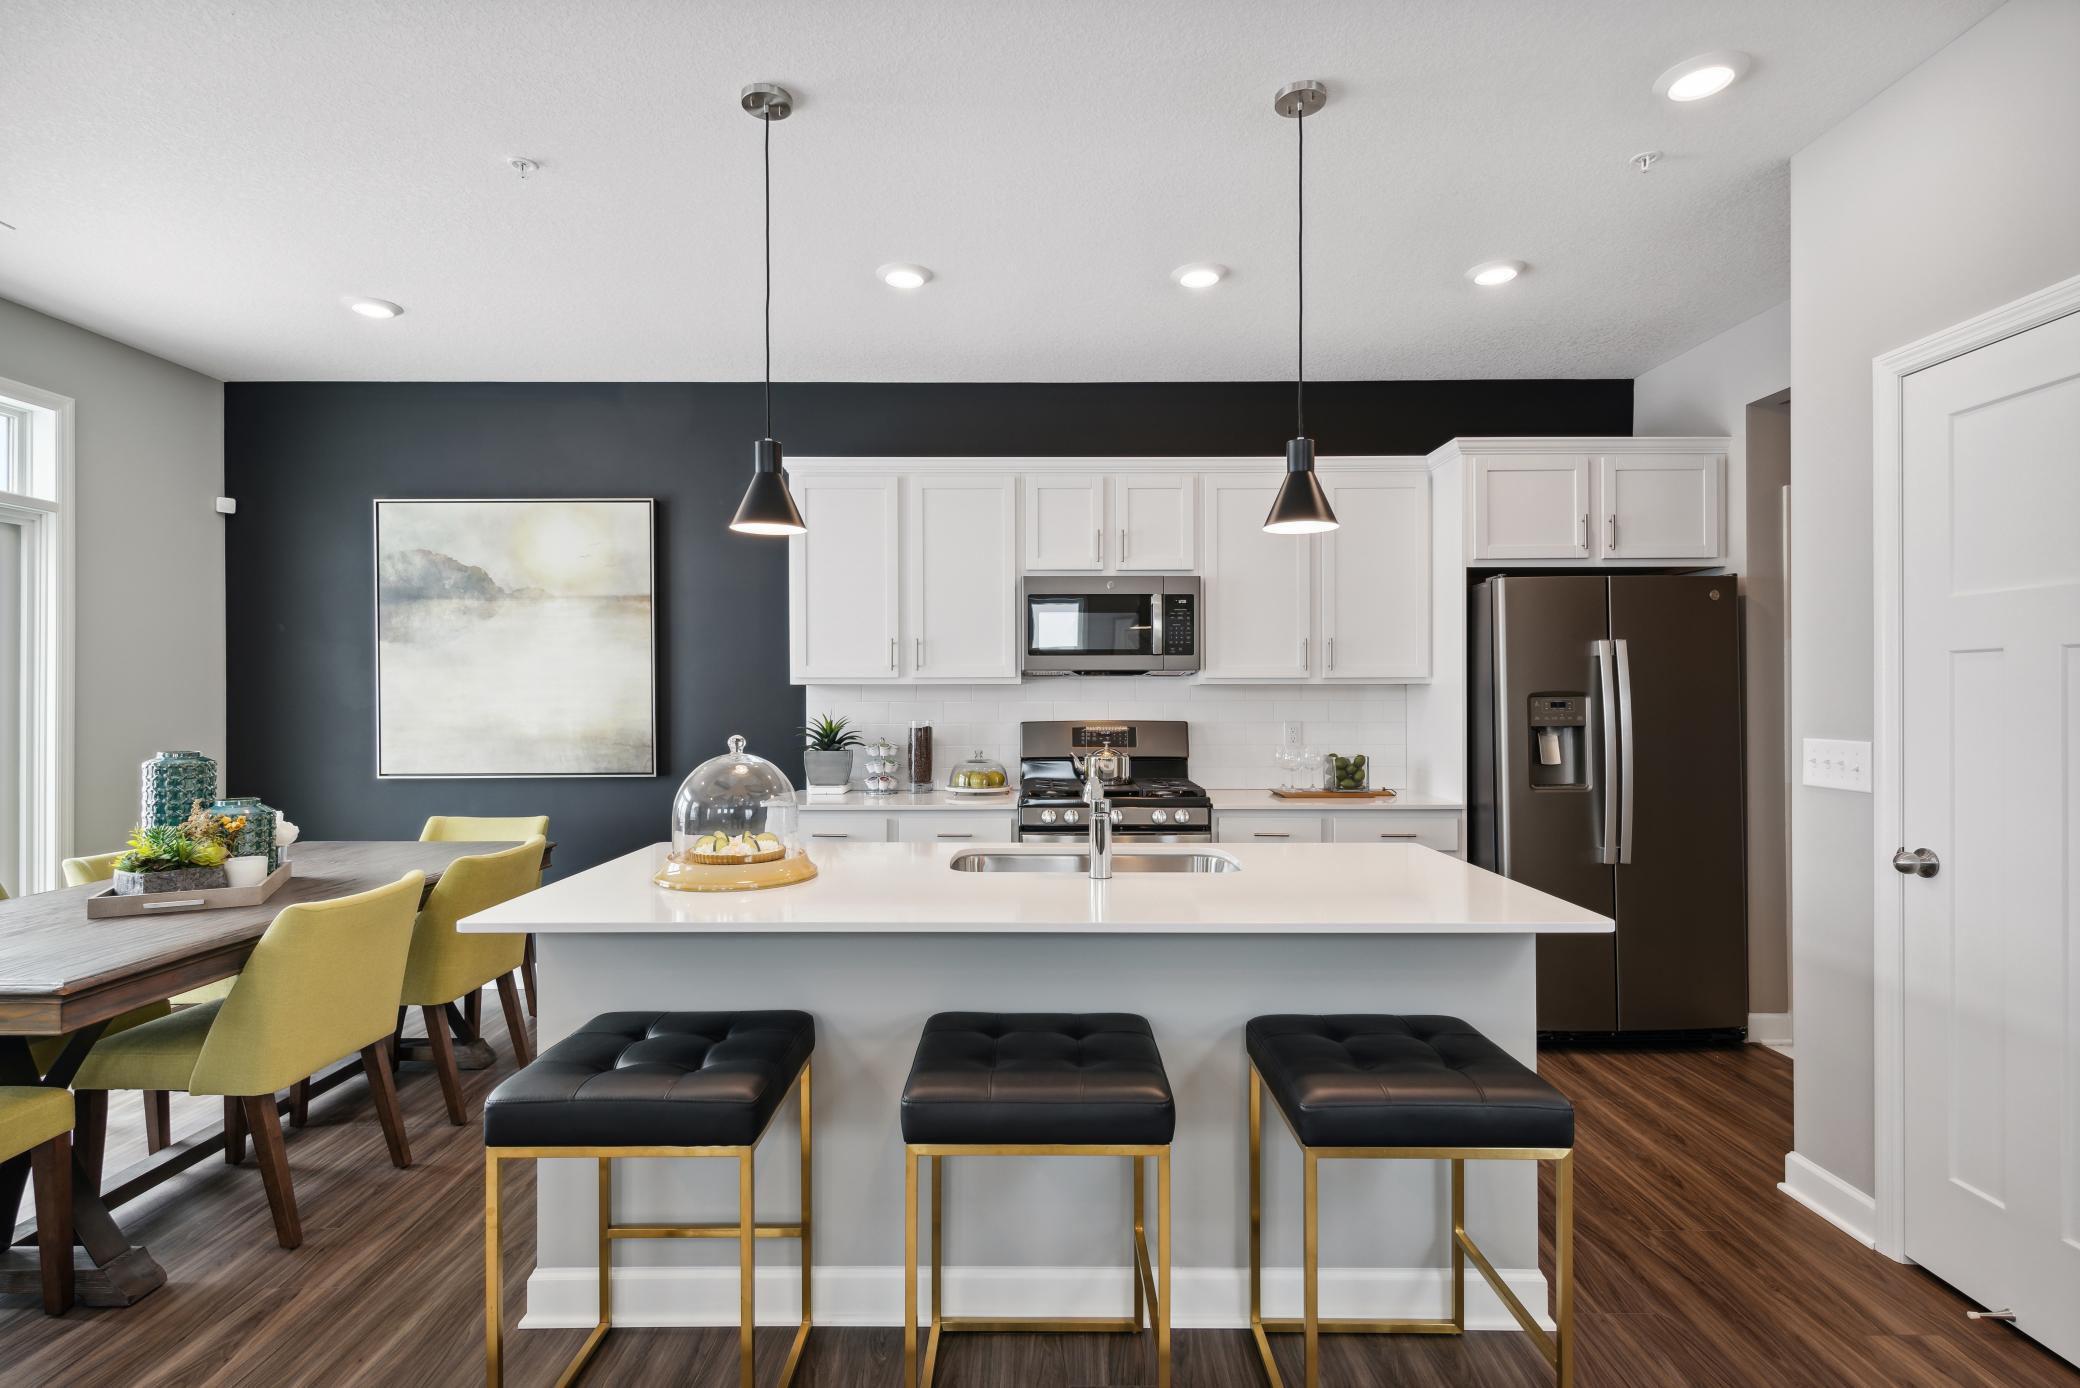 Welcome to the Raleigh at Weston Commons! A Spacious kitchen and dinette with convenient sliding glass door. *Photos of model home; colors and finishes will vary.